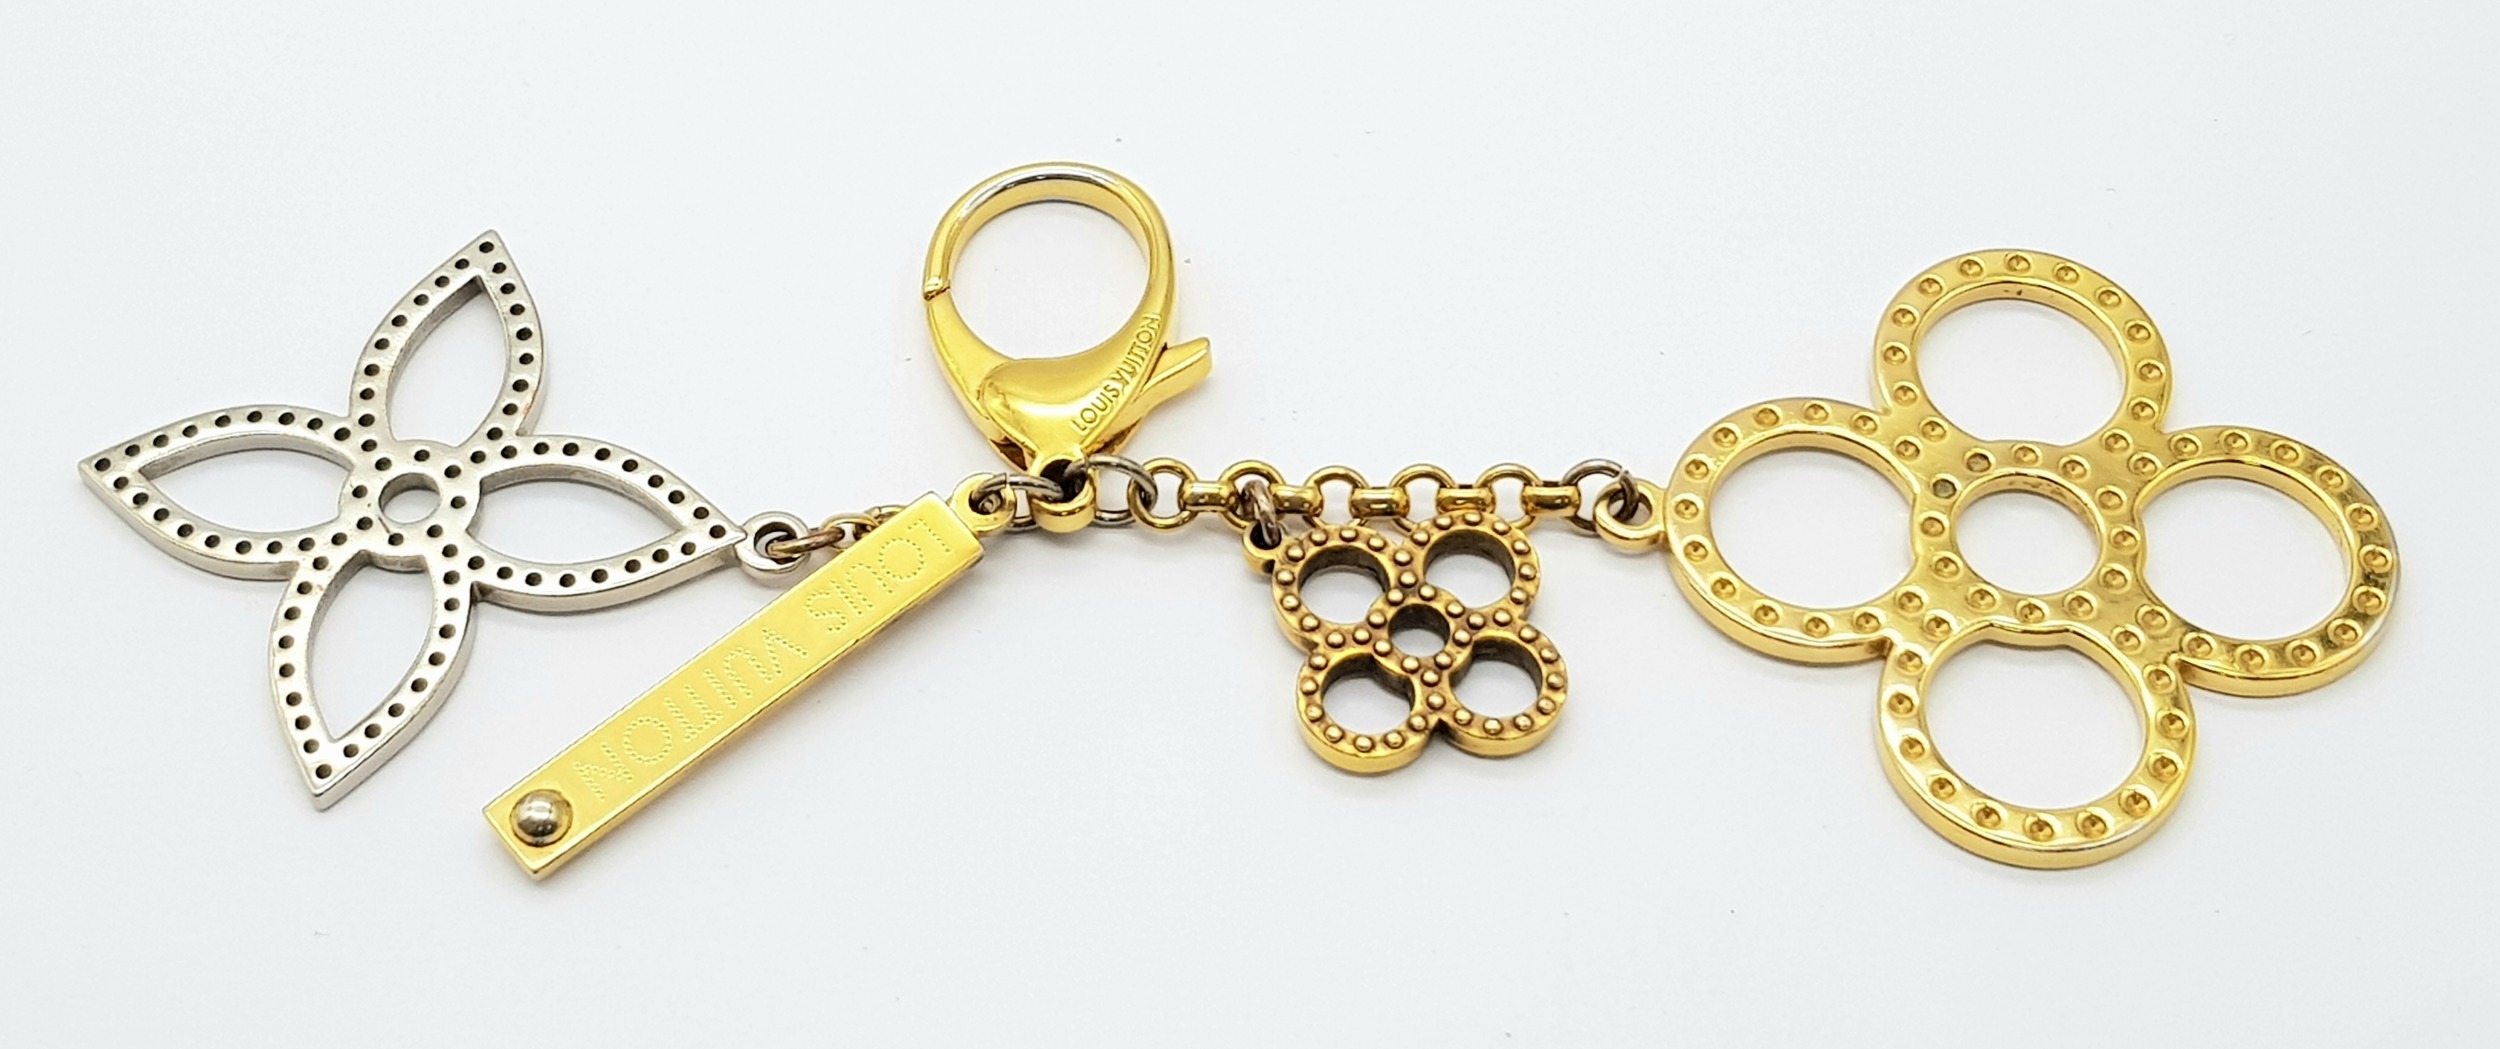 A Louis Vuitton Bijoux Sac Tapage Charm/Key Ring. Gold and silver-toned hardware with iconic LV - Image 2 of 7